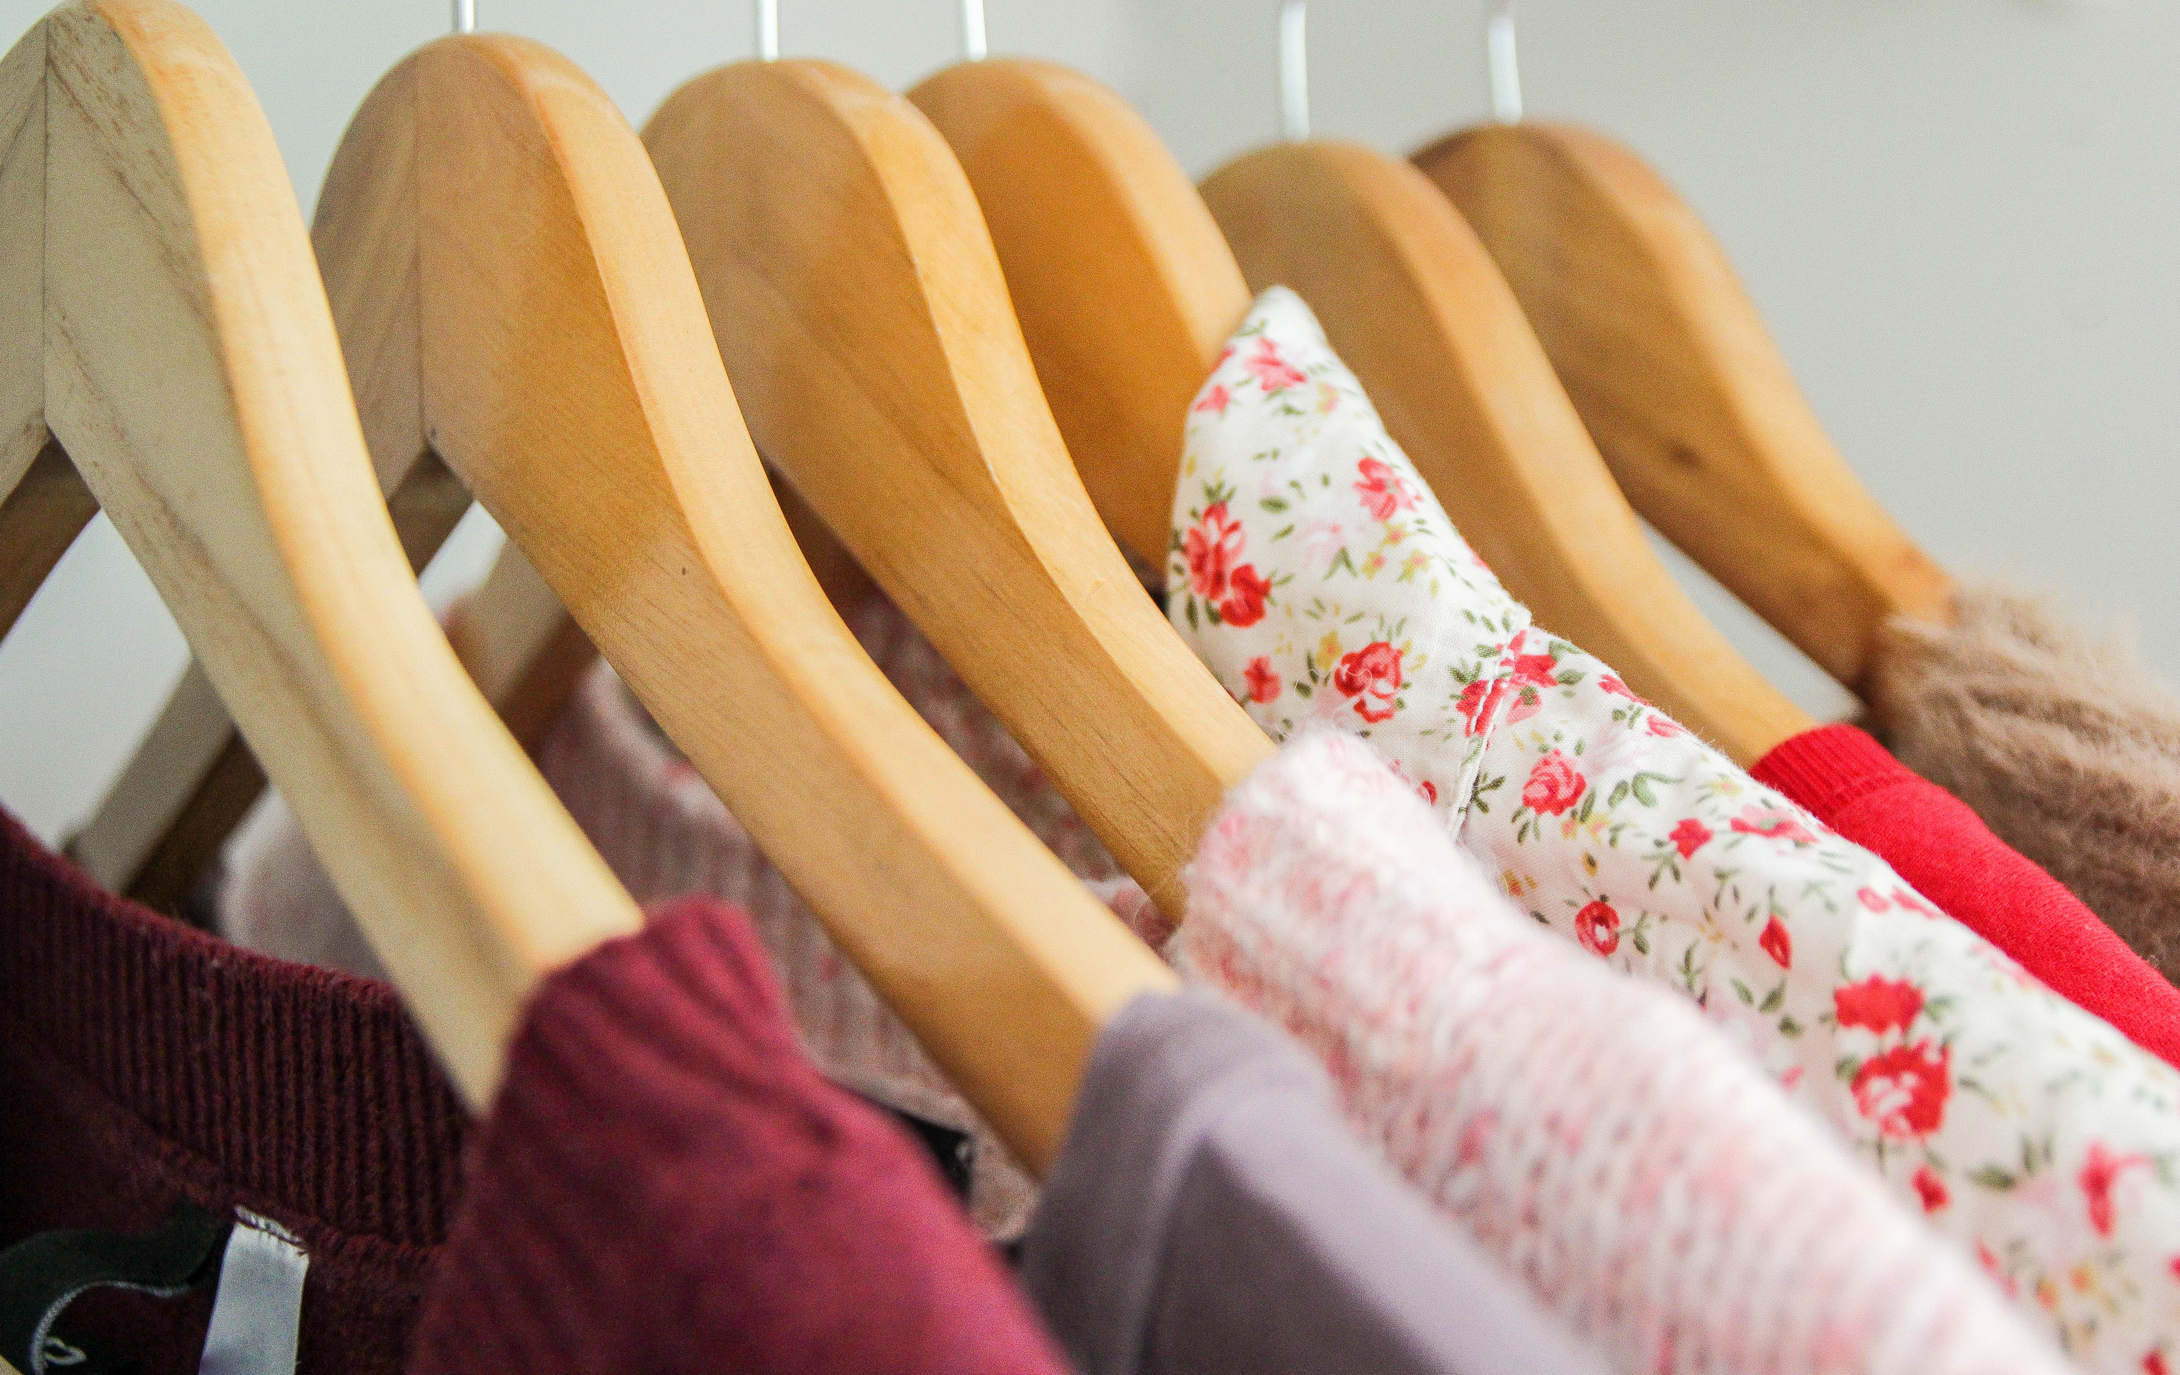 Wondering Which Clothes To Hang Or Fold? Here's The Answers